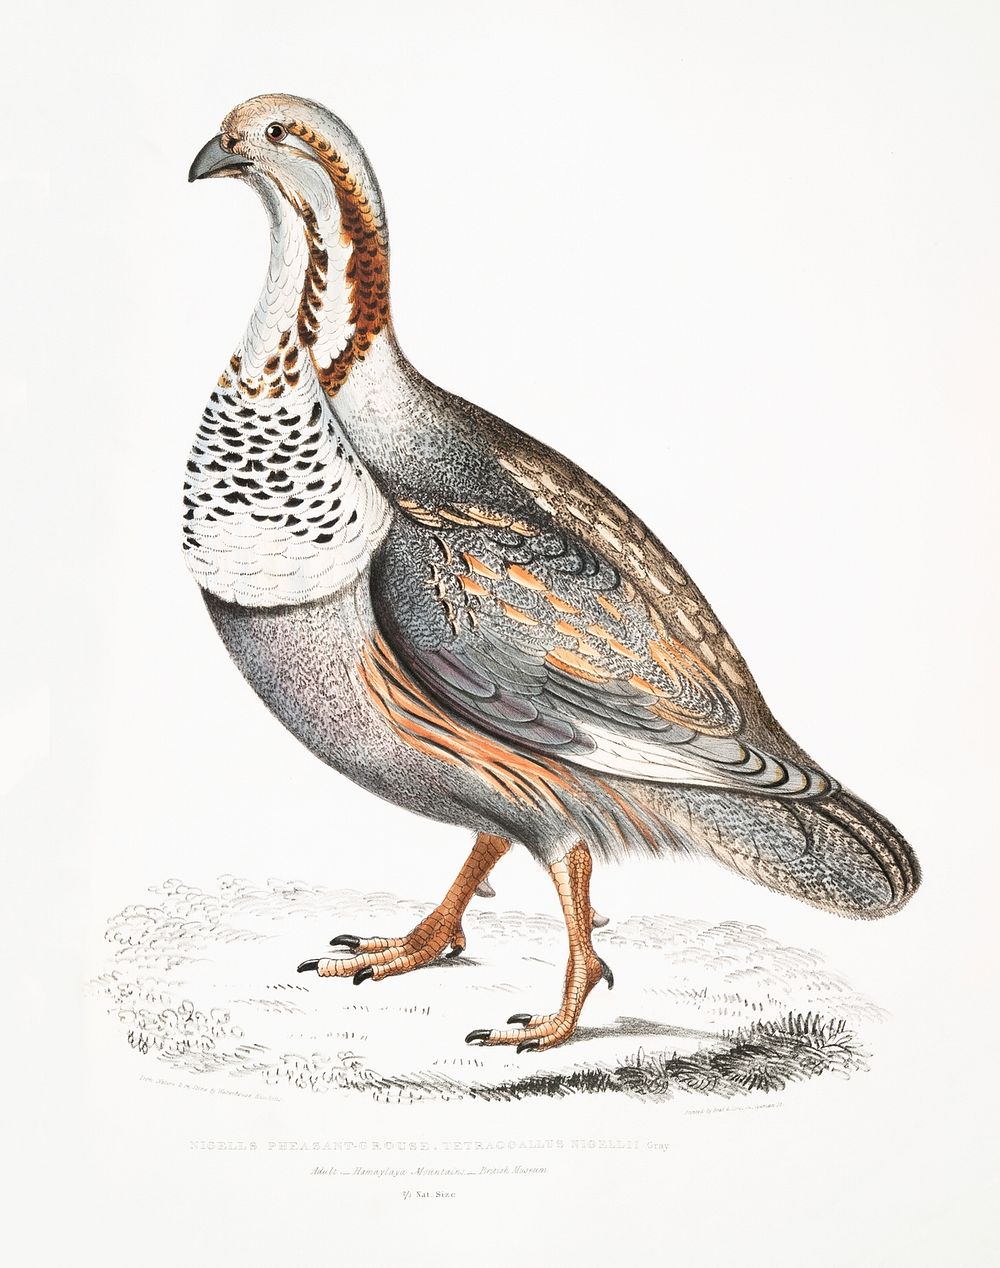 Nigell's Pheasant Grouse (Tetraogallus Nigellii) from Illustrations of Indian zoology (1830-1834) by John Edward Gray (1800…